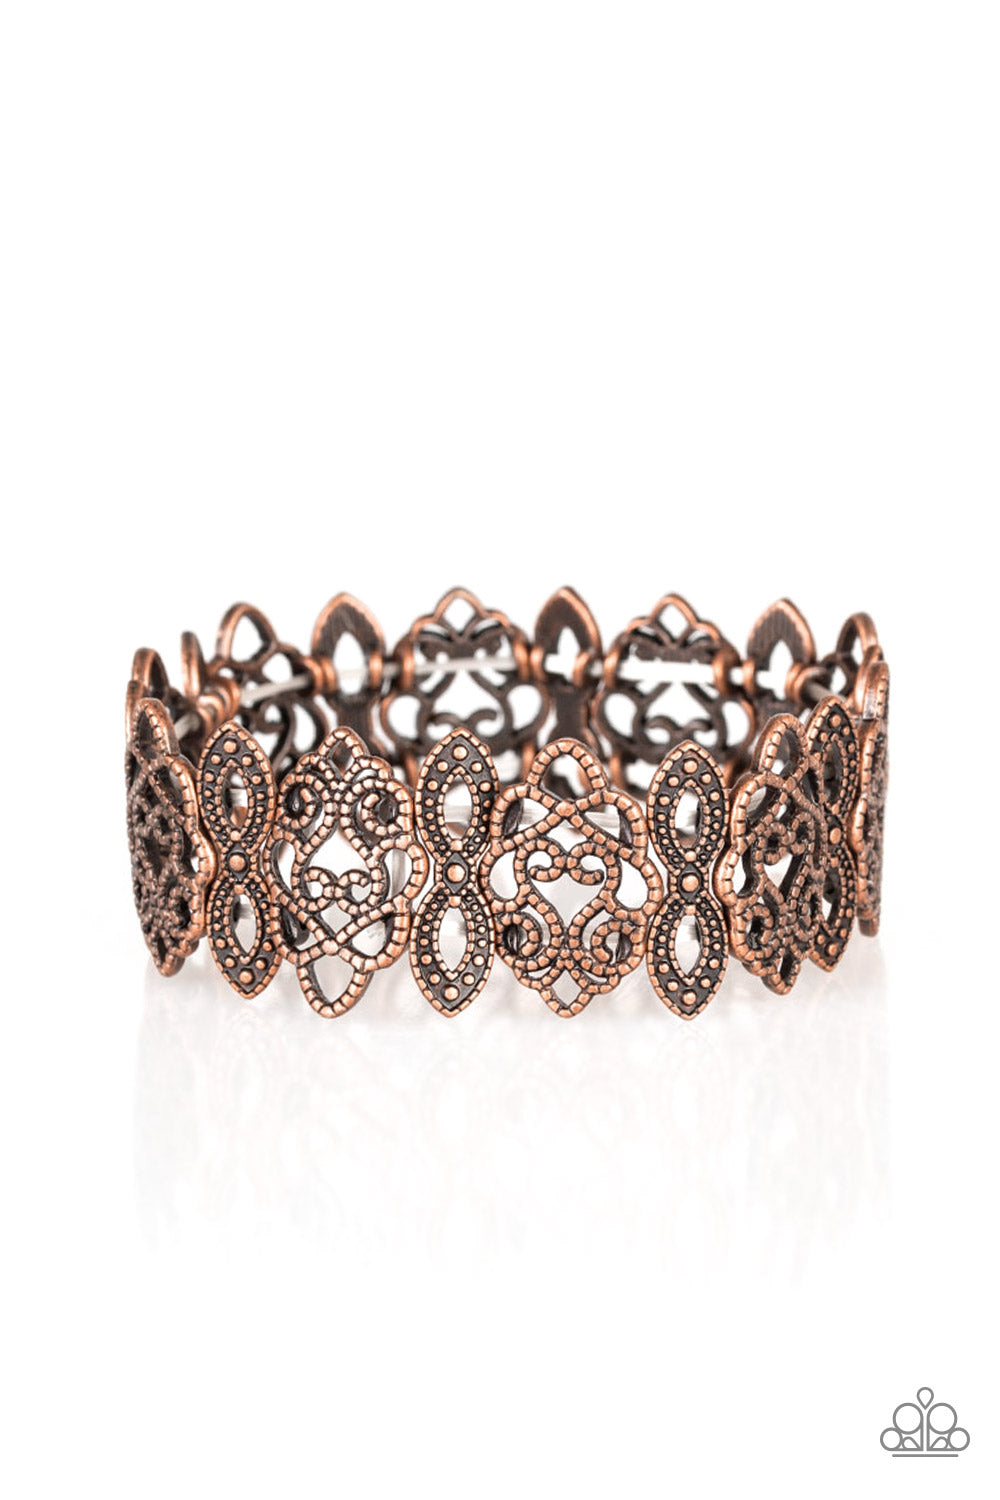 Lisa Yang Jewelry : Quick Copper Wire Focal Bead Bracelets